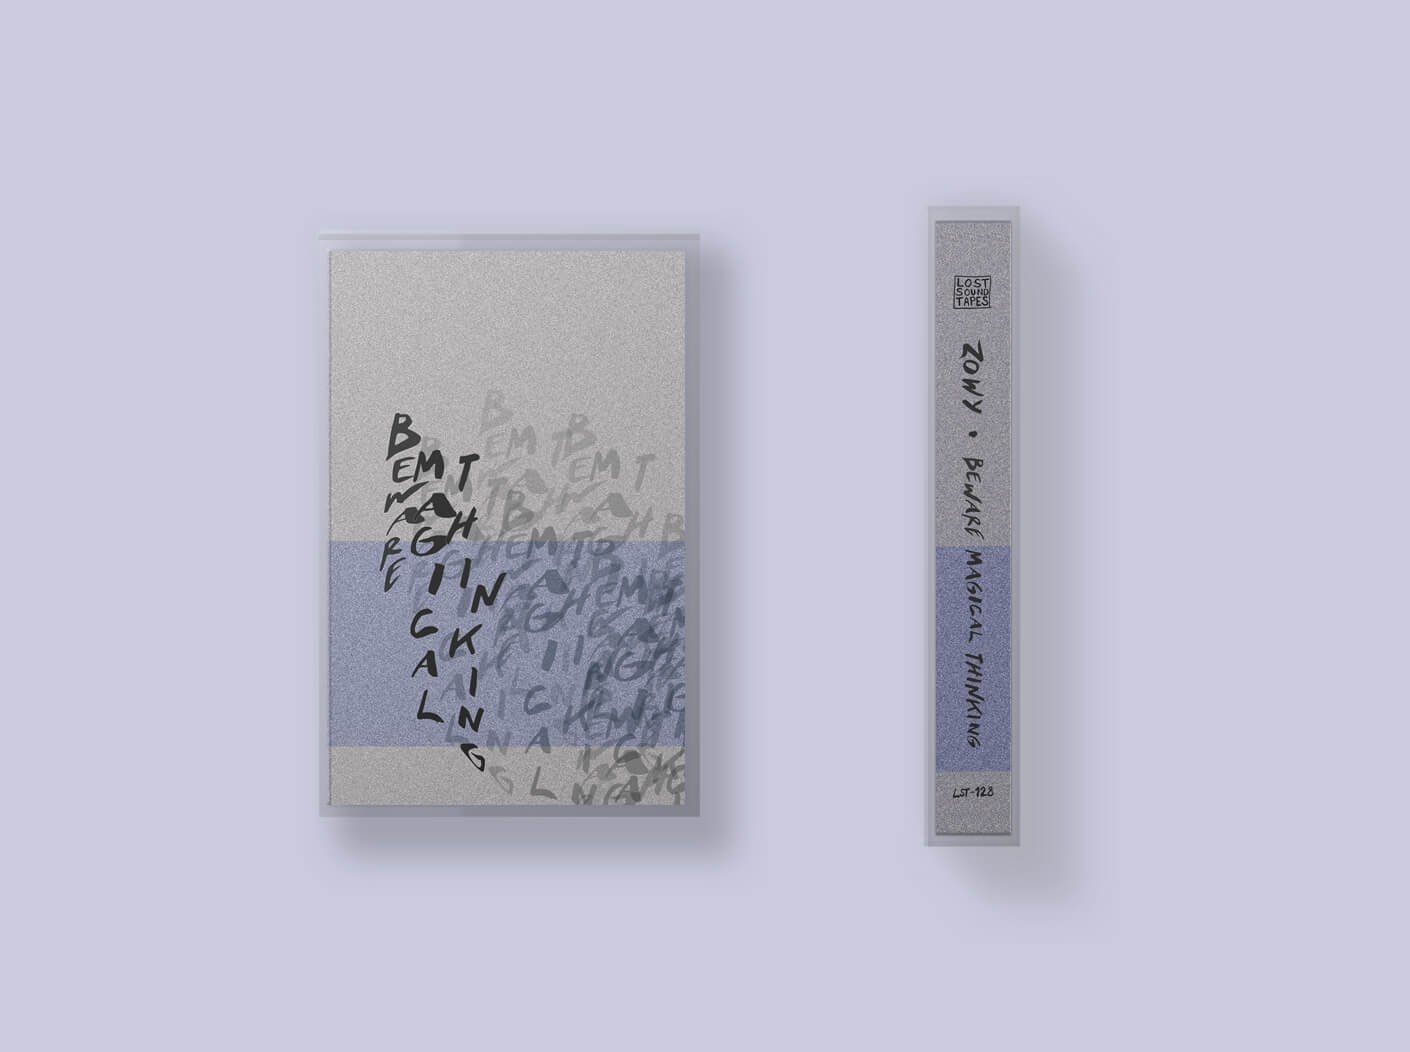 ZOWY "Beware Magical Thinking" cassette tape